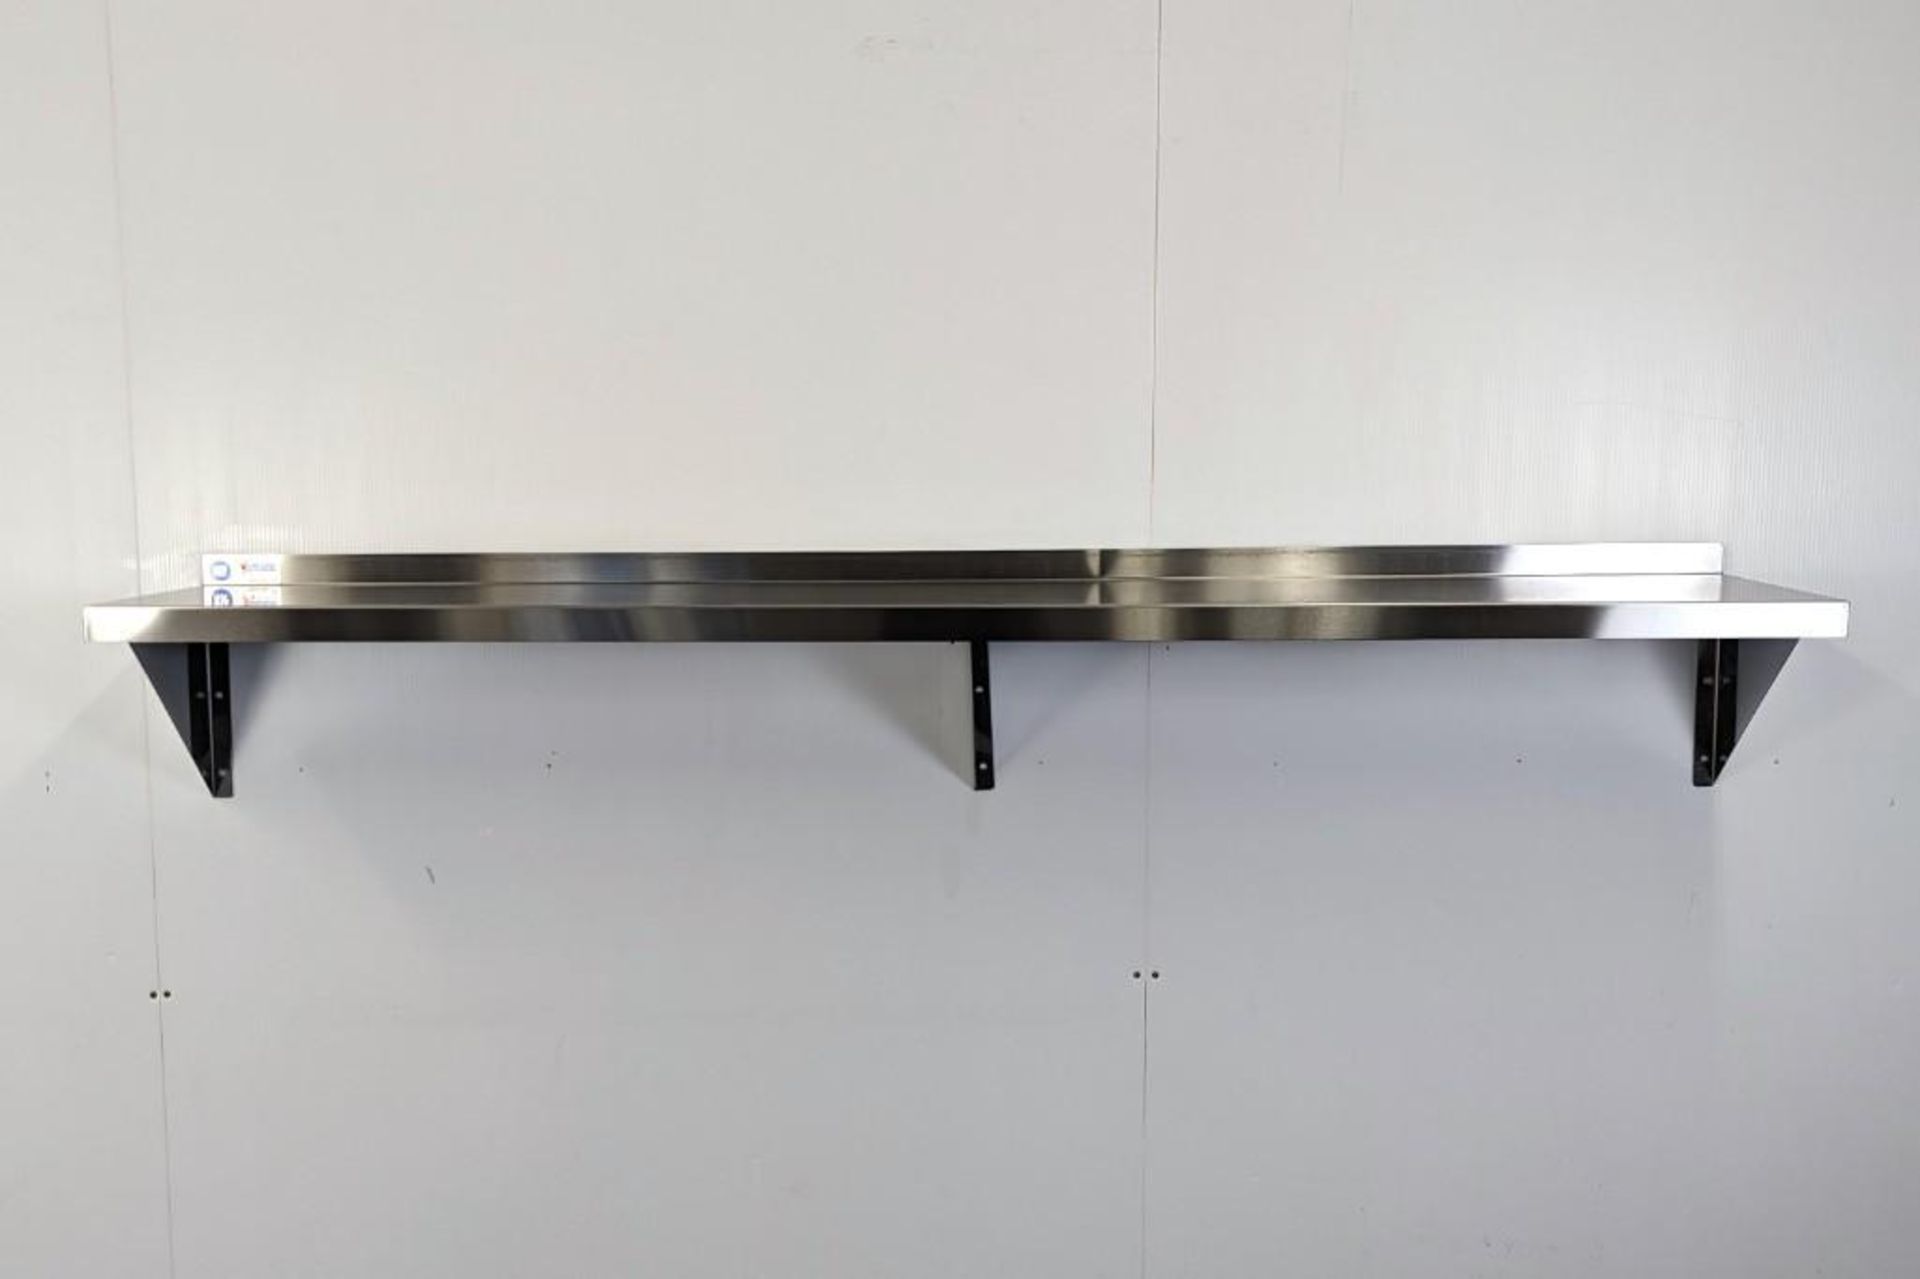 72" X 12" STAINLESS STEEL WALL SHELF - OMCAN 30455 - NEW - Image 2 of 4